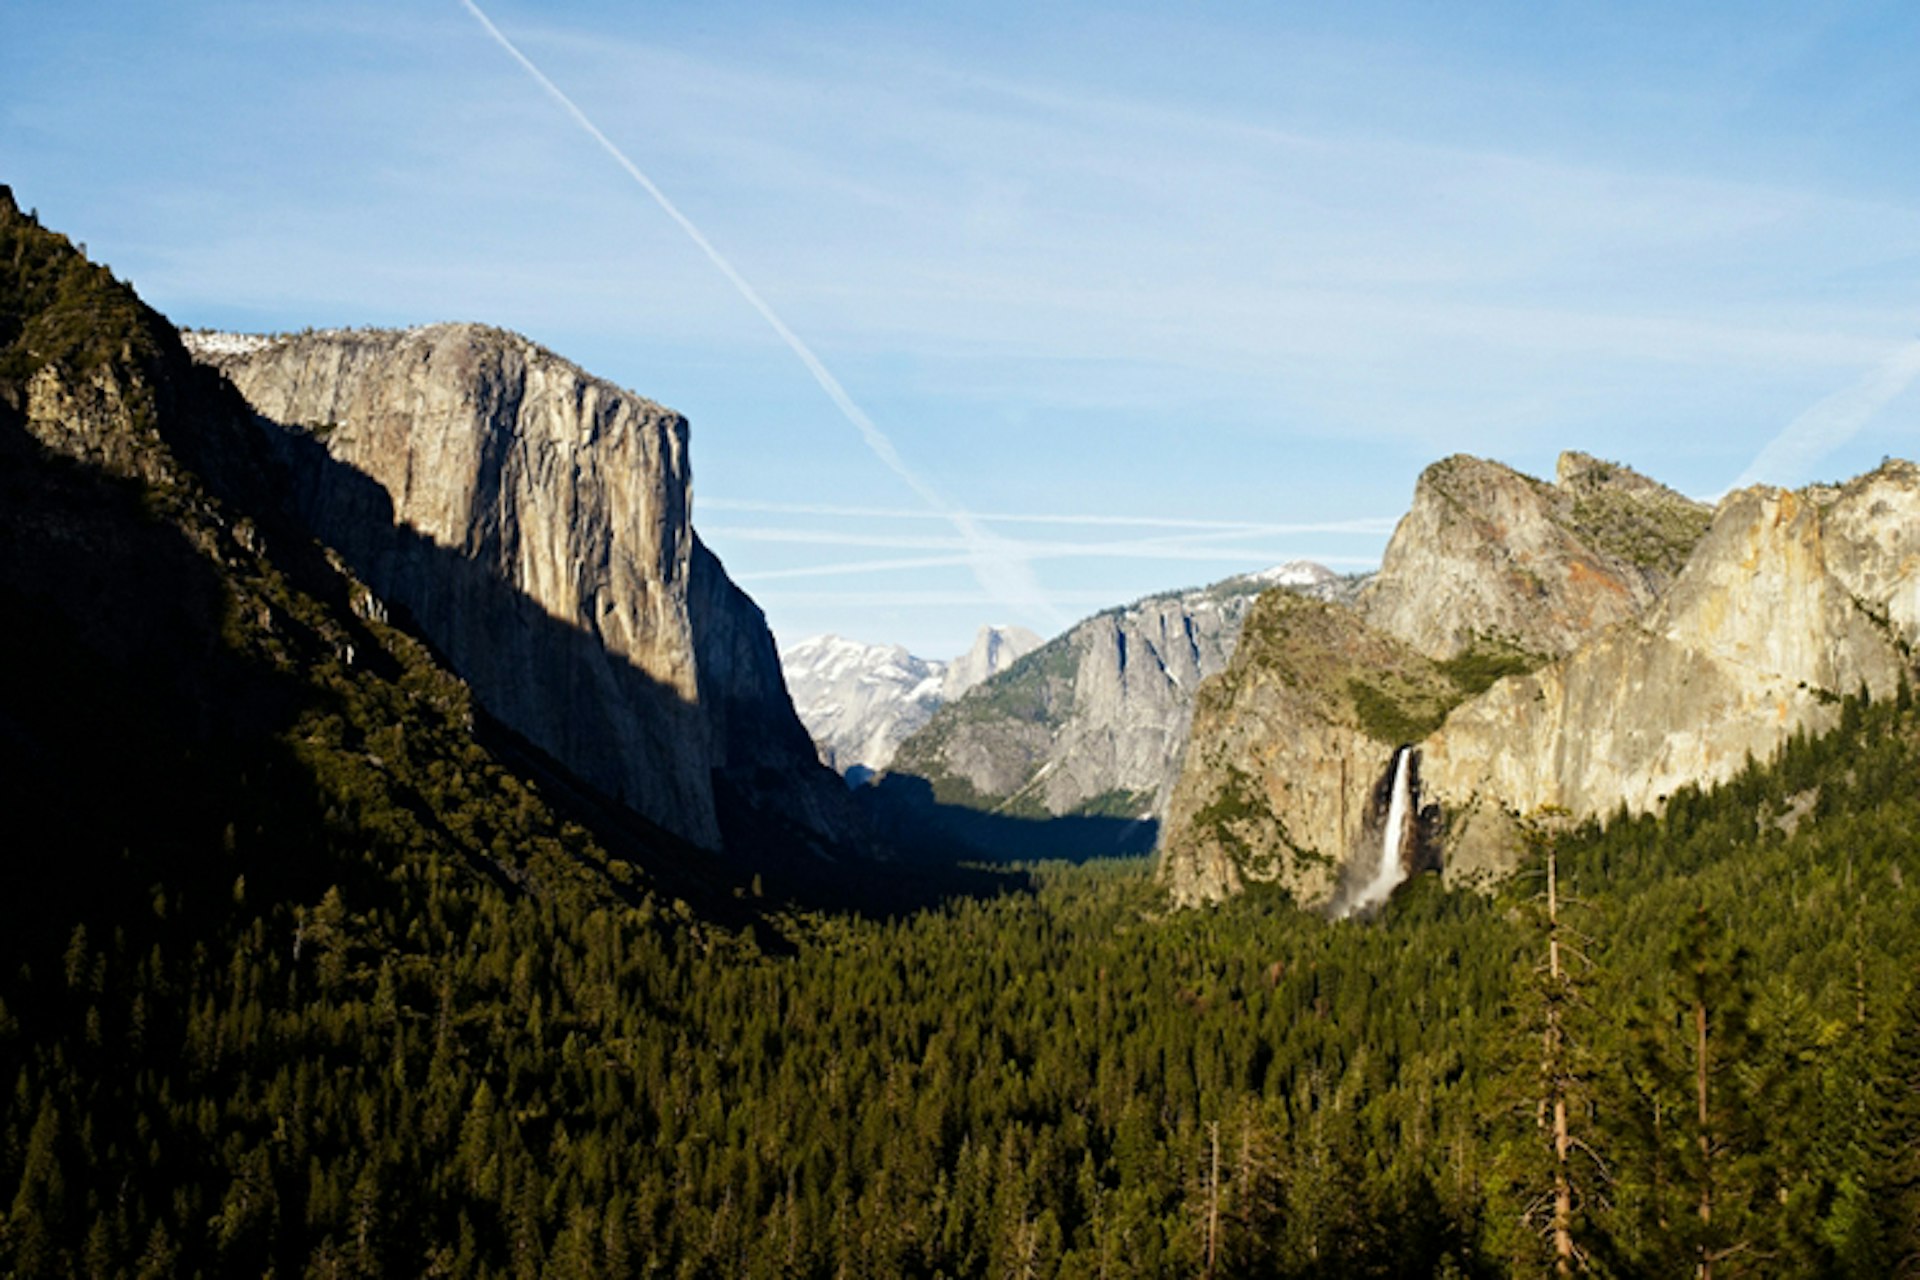 A lifetime of visits isn't enough to exhaust the magic of Yosemite Valley. Image by Mark Read / Lonely Planet